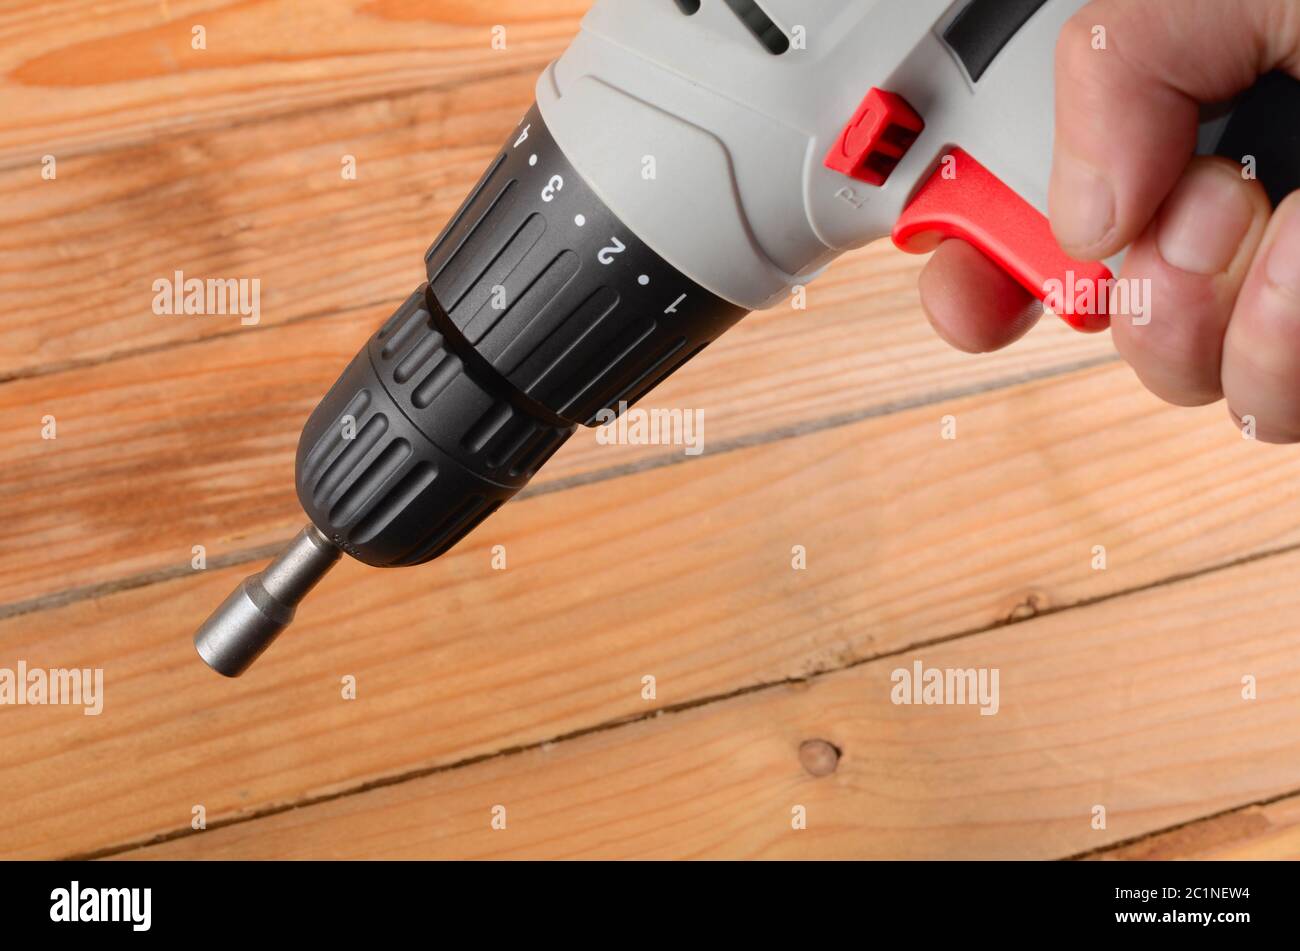 Screwdriver in a man's hand close up Stock Photo